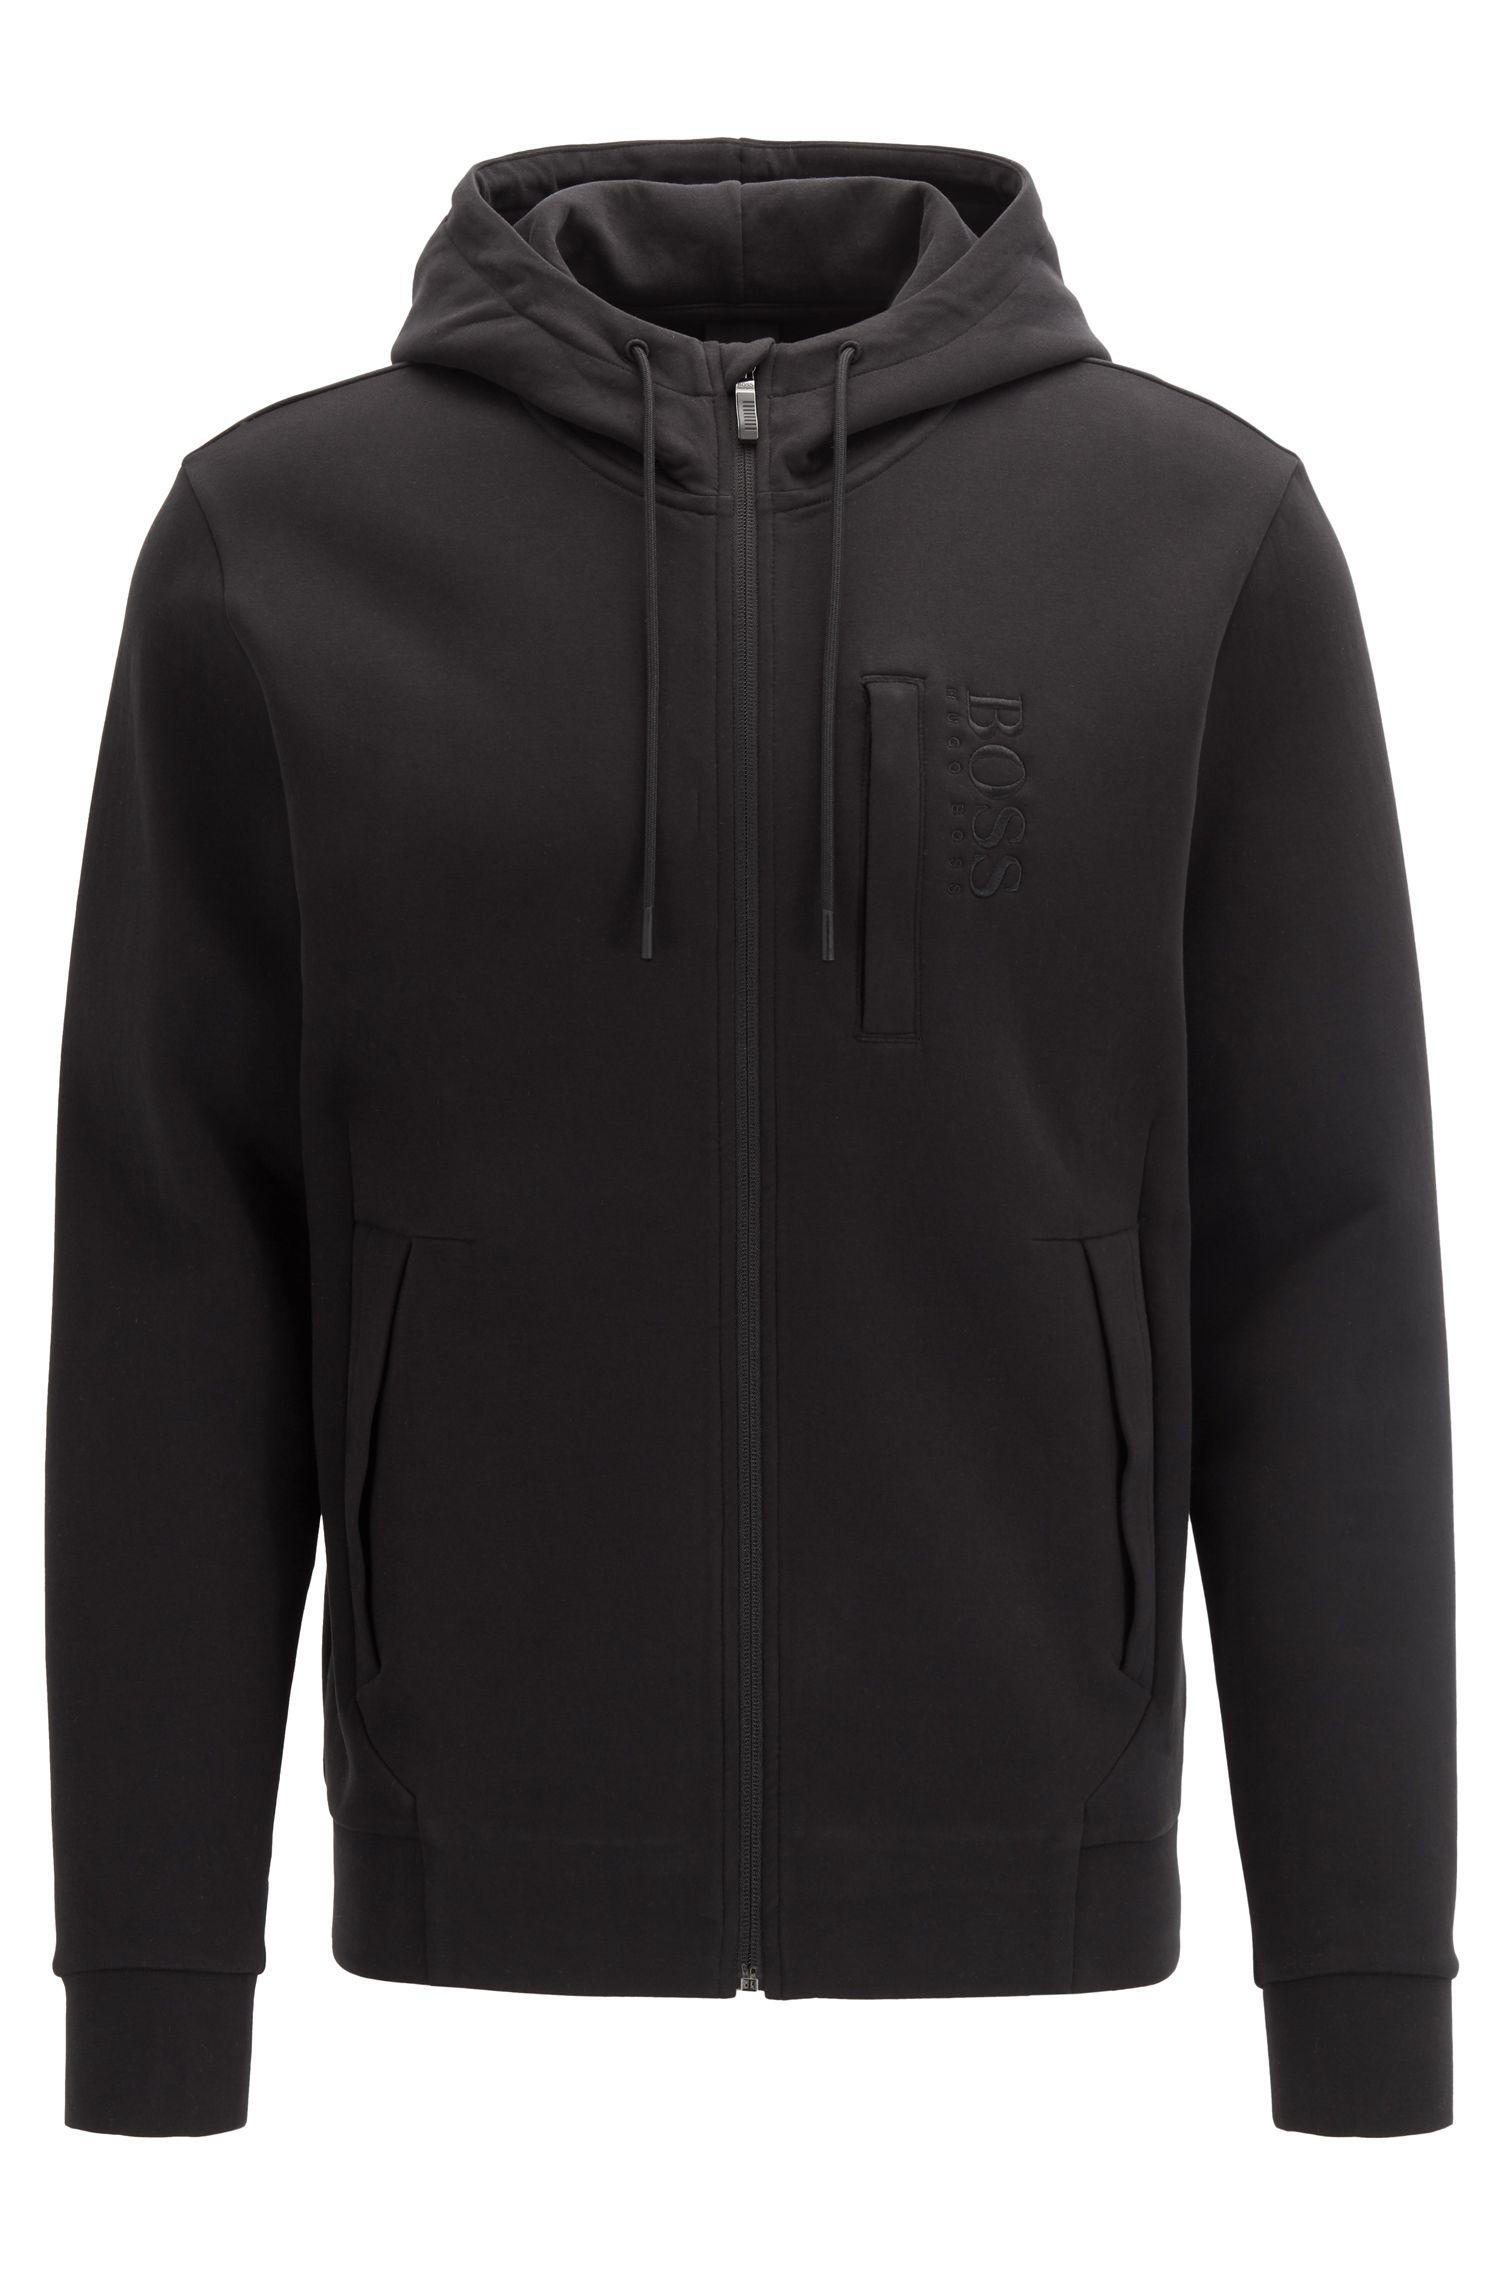 BOSS Zip-through Hooded Sweatshirt In A Cashmere-touch Cotton Blend in ...